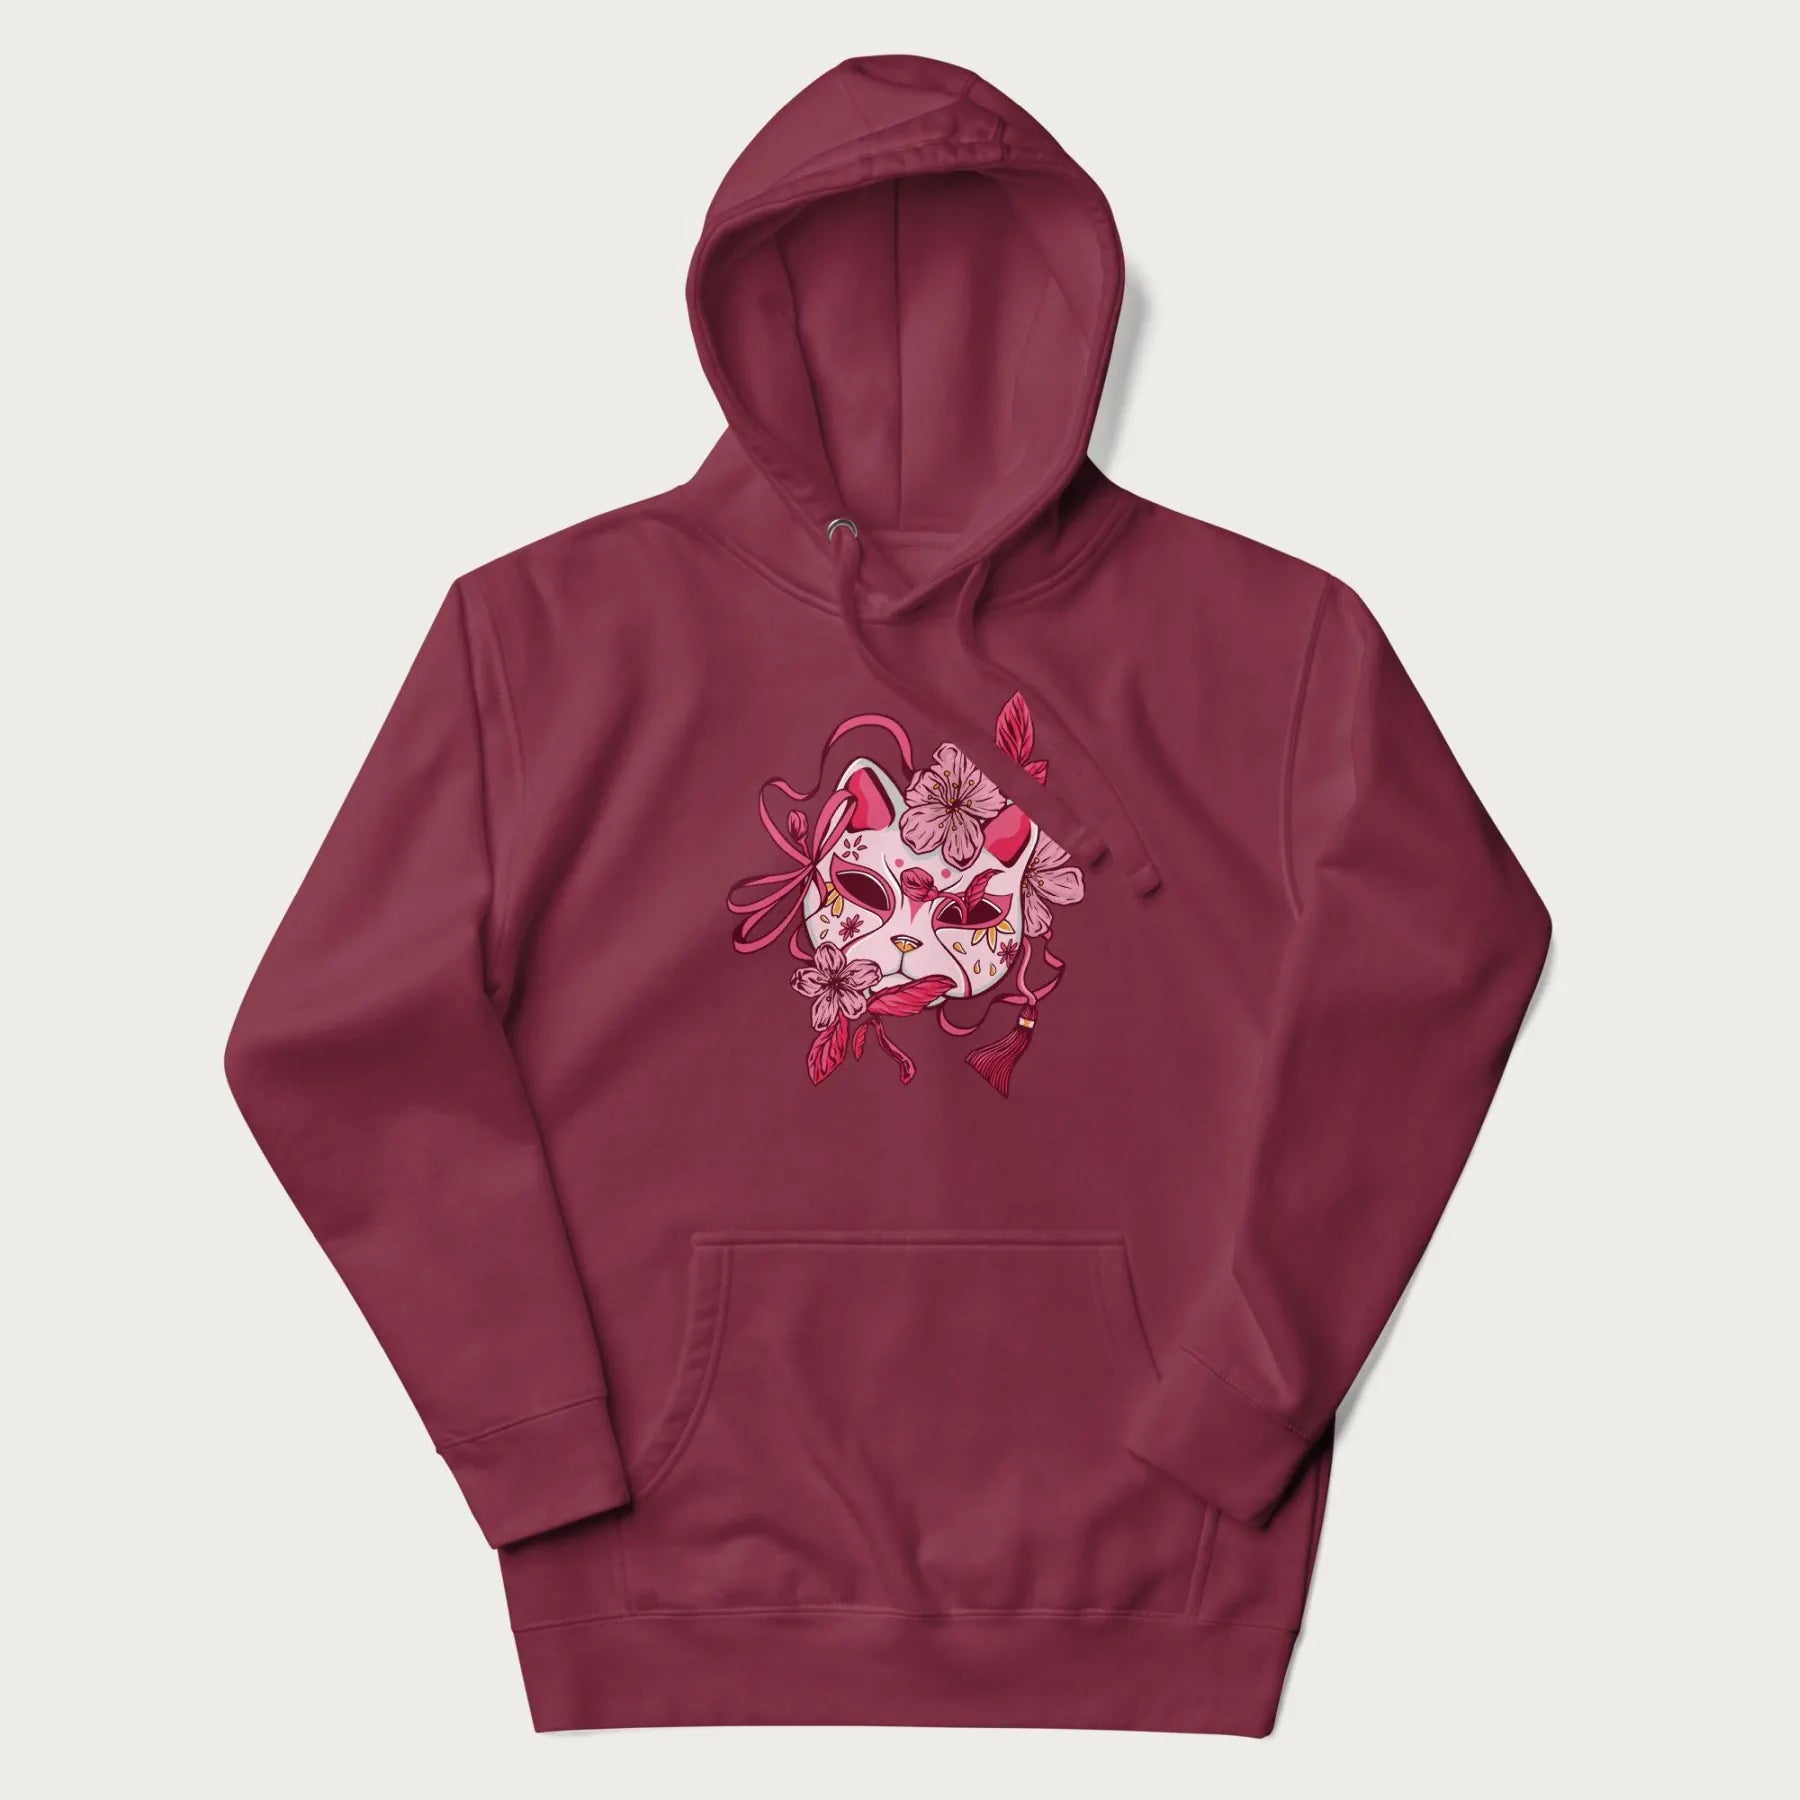 Maroon hoodie with a Japanese kitsune mask and sakura design on the front.